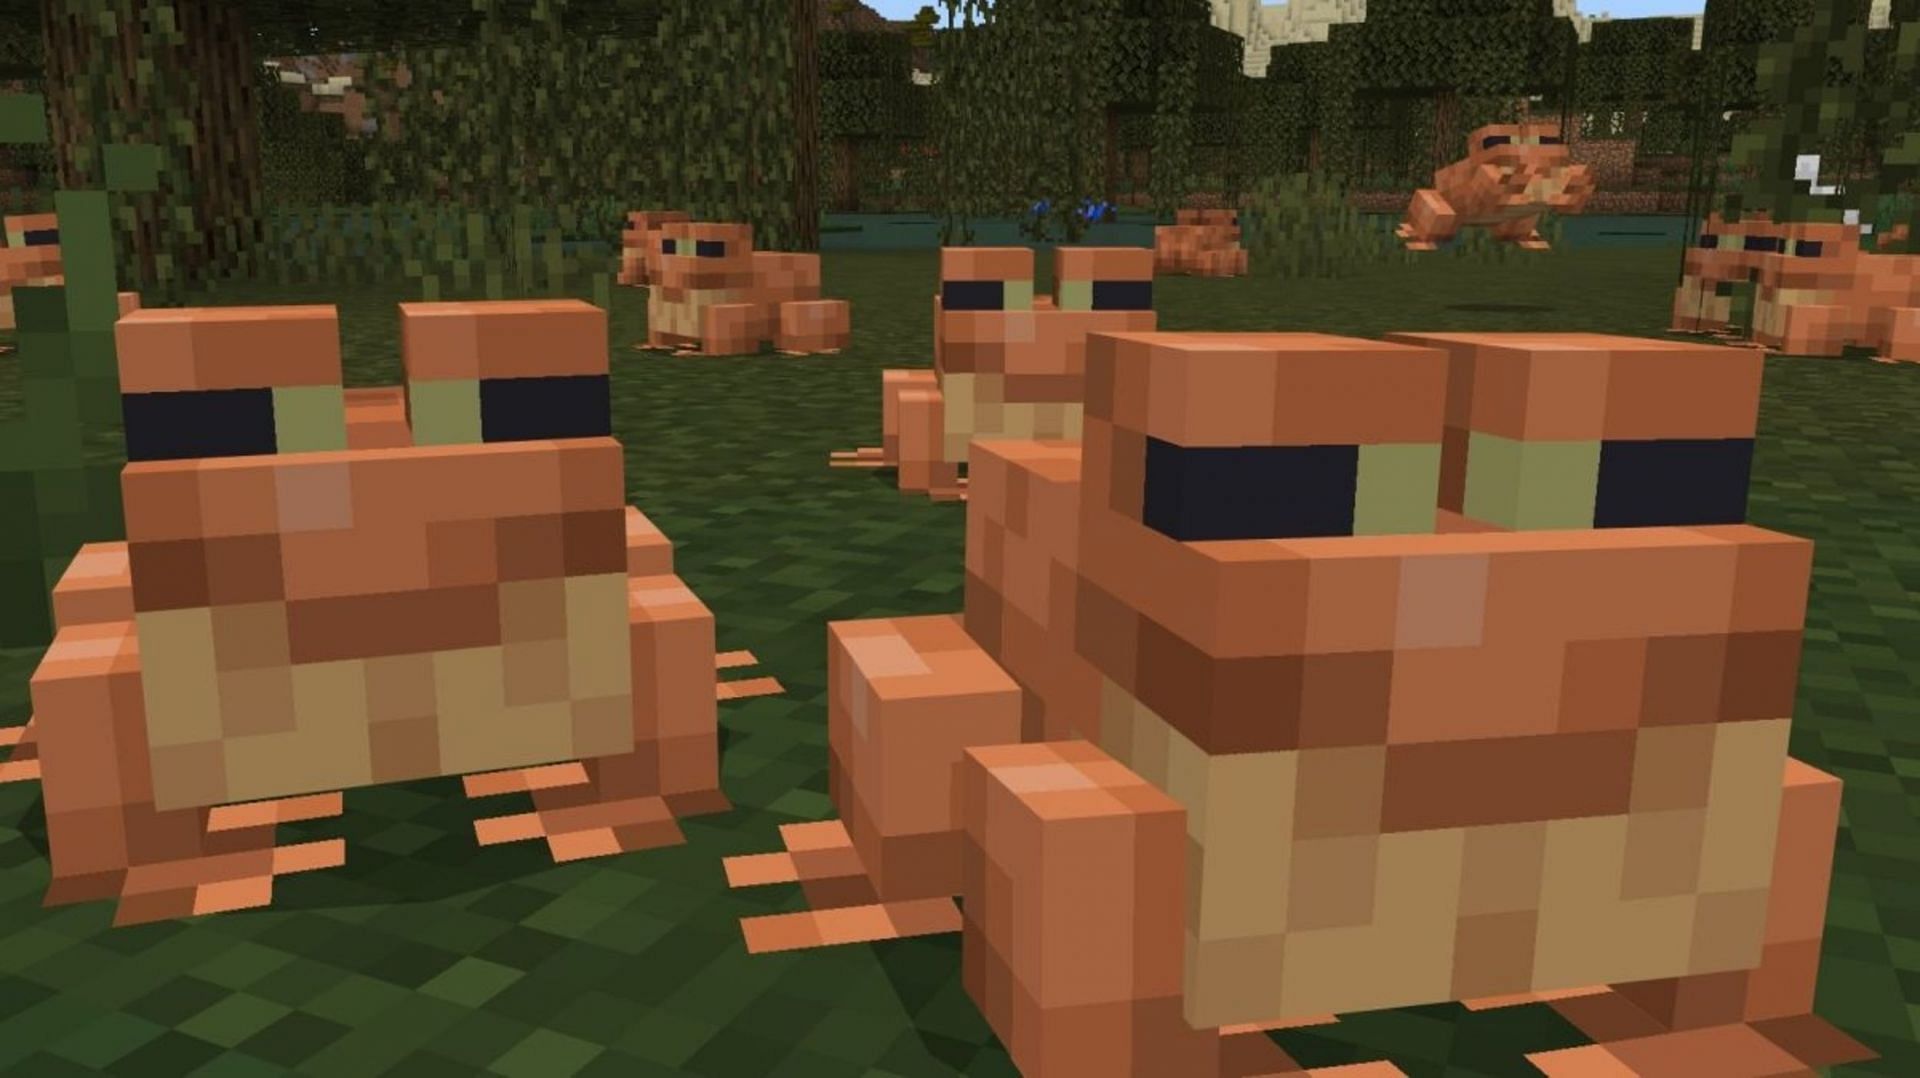 Frogs can survive in various climates (Image via Mojang)